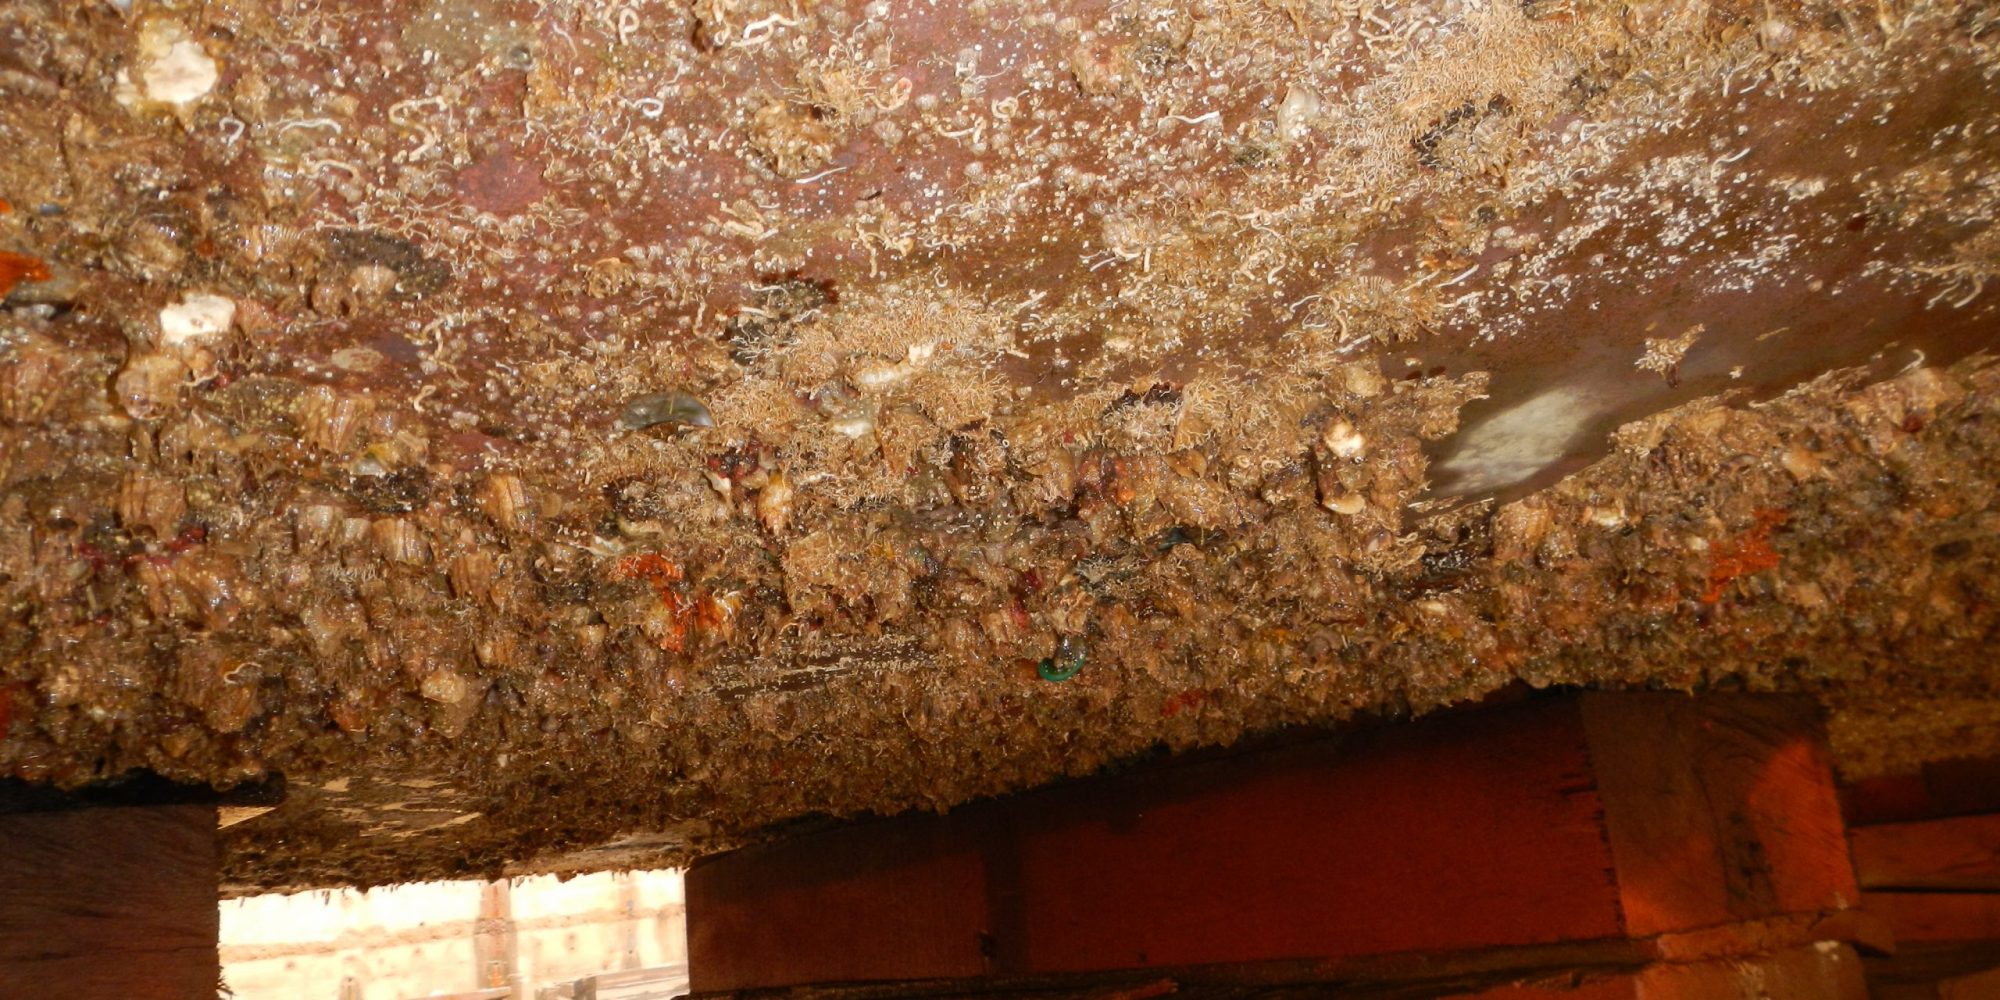 Hull foulling - c.Biofouling Solutions